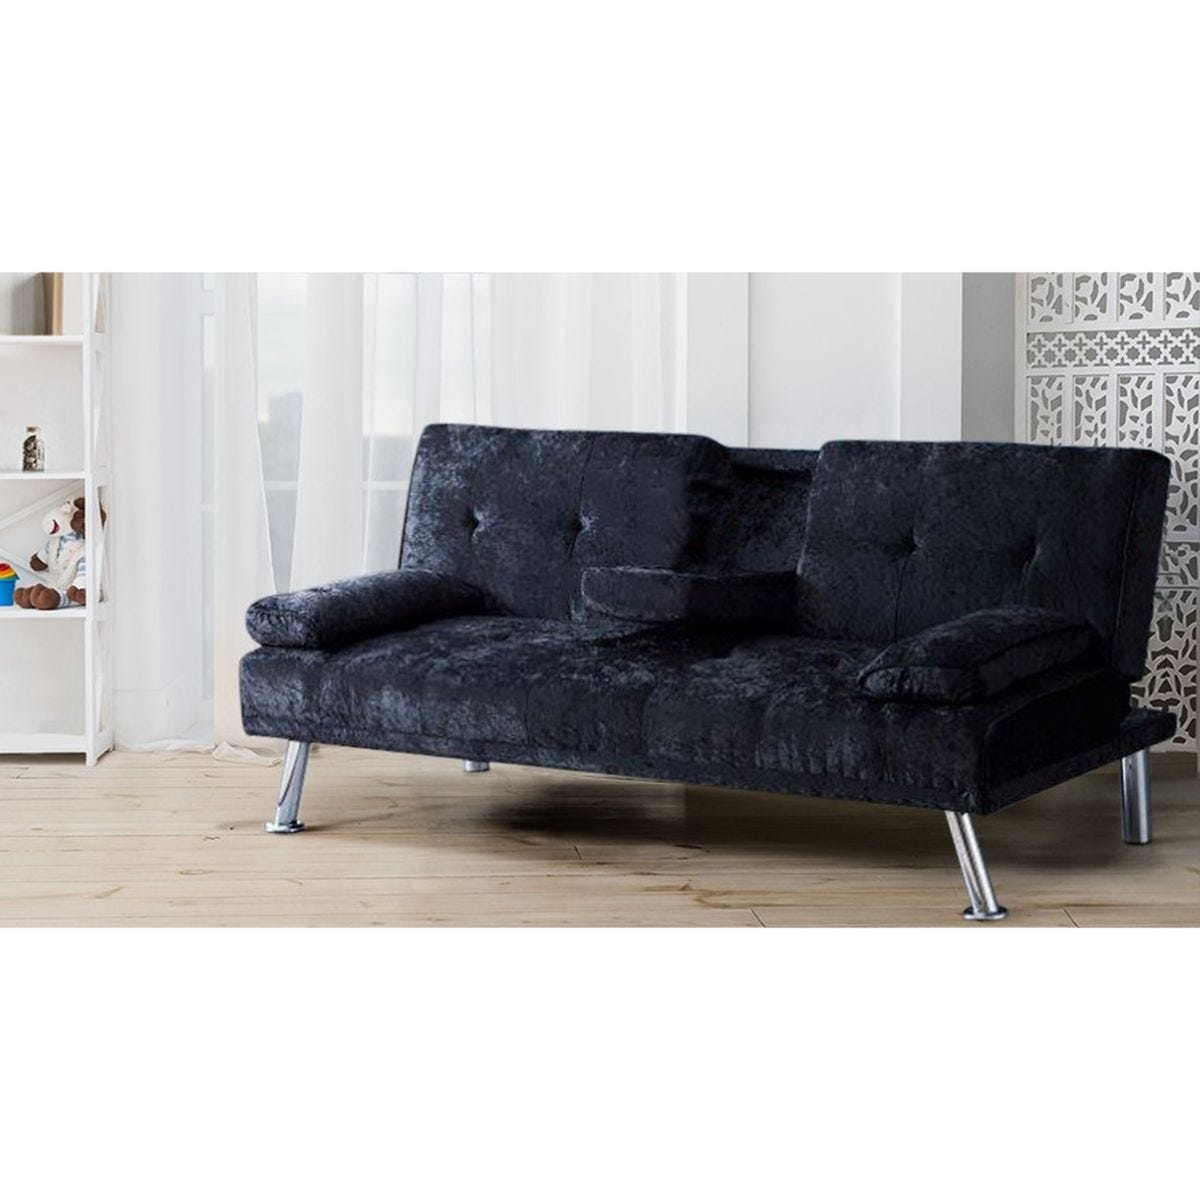 SleepOn Crushed Velvet Italian Style Luxury Sofa Bed With Drink Cup Holder Table Black